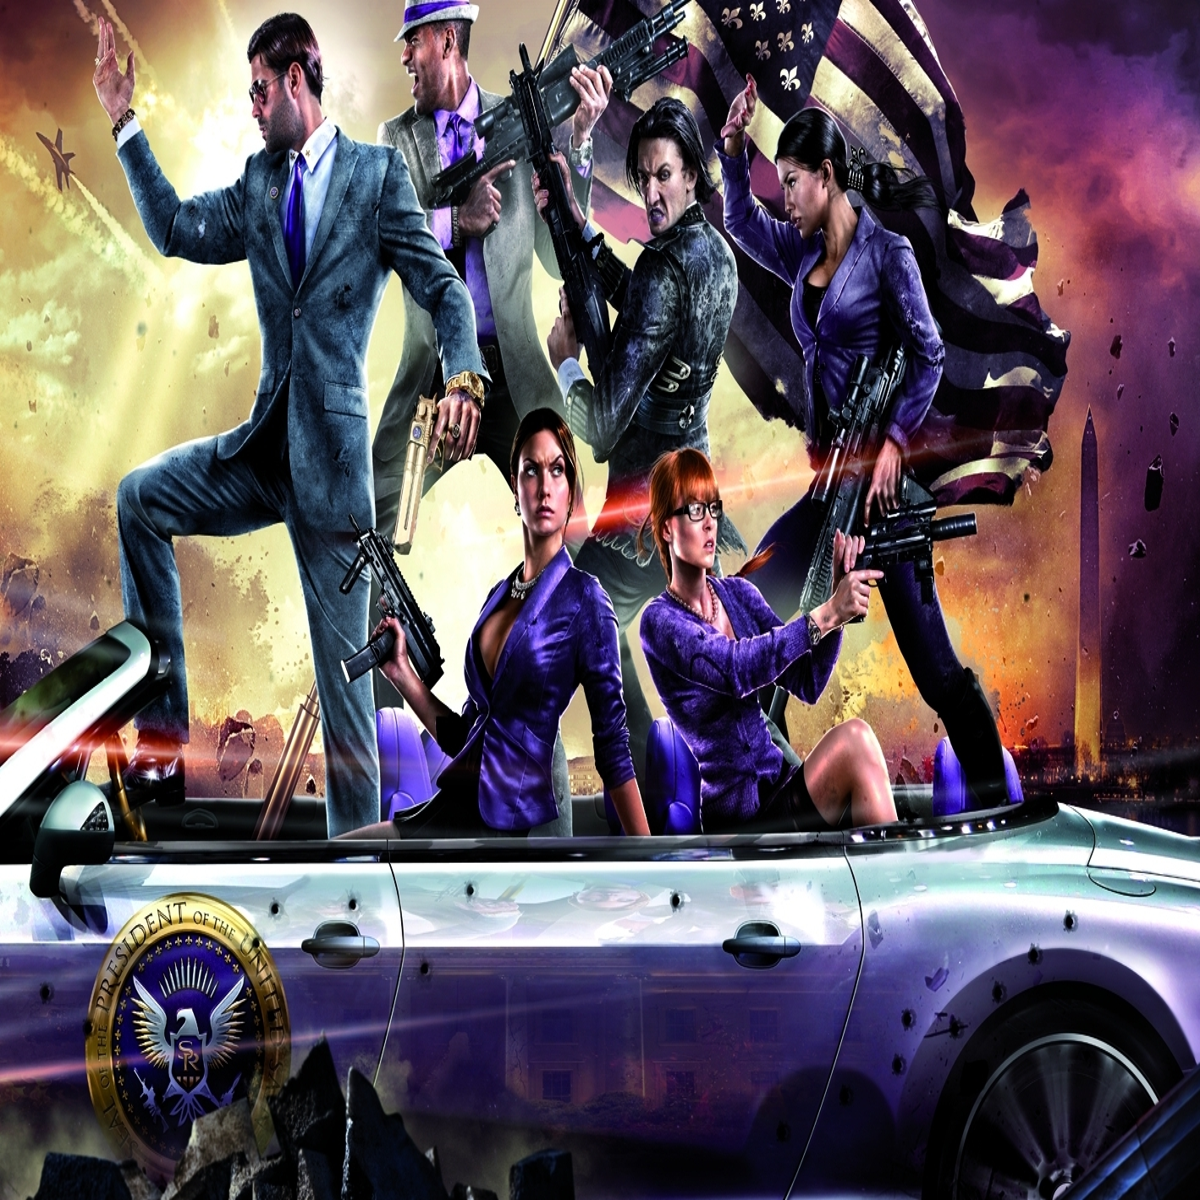 Saints Row 4' Gameplay Video Highlights Super Powers & Crazy Weapons